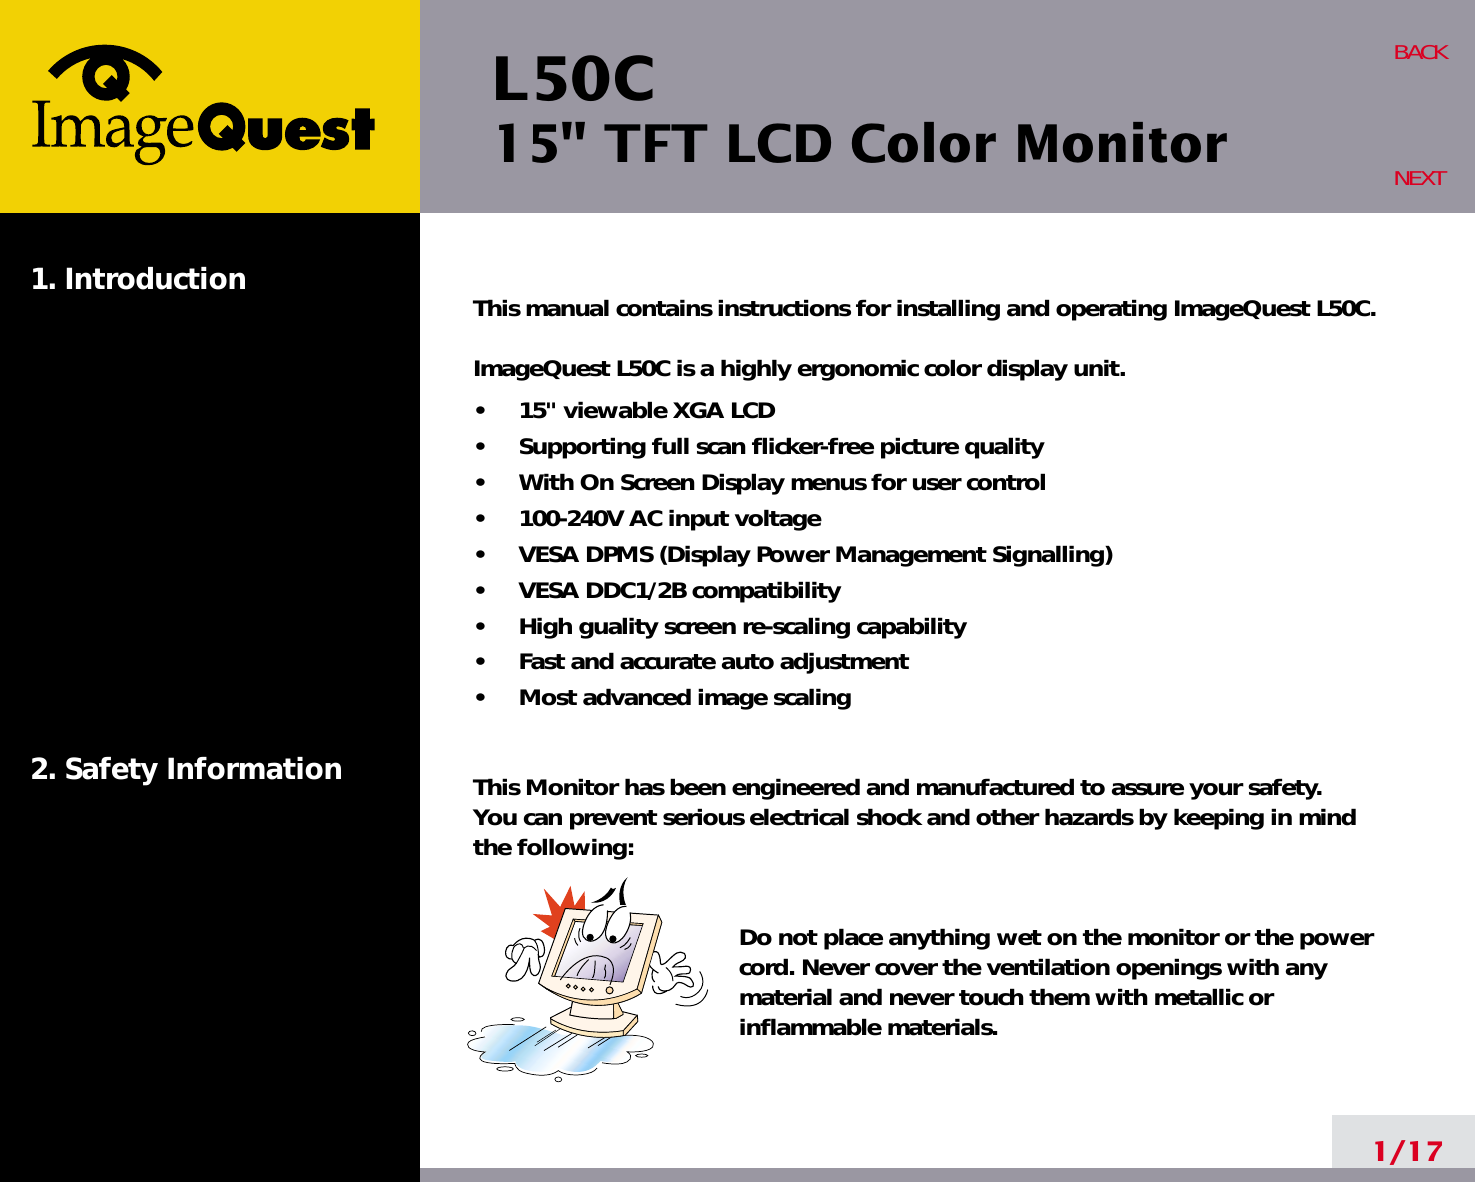 L50C15&quot; TFT LCD Color Monitor1. Introduction2. Safety Information1/17BACKNEXTThis manual contains instructions for installing and operating ImageQuest L50C.ImageQuest L50C is a highly ergonomic color display unit.•     15&quot; viewable XGA LCD•     Supporting full scan flicker-free picture quality•     With On Screen Display menus for user control•     100-240V AC input voltage•     VESA DPMS (Display Power Management Signalling)•     VESA DDC1/2B compatibility•     High guality screen re-scaling capability•     Fast and accurate auto adjustment•     Most advanced image scalingThis Monitor has been engineered and manufactured to assure your safety. You can prevent serious electrical shock and other hazards by keeping in mind the following:Do not place anything wet on the monitor or the powercord. Never cover the ventilation openings with anymaterial and never touch them with metallic or inflammable materials.